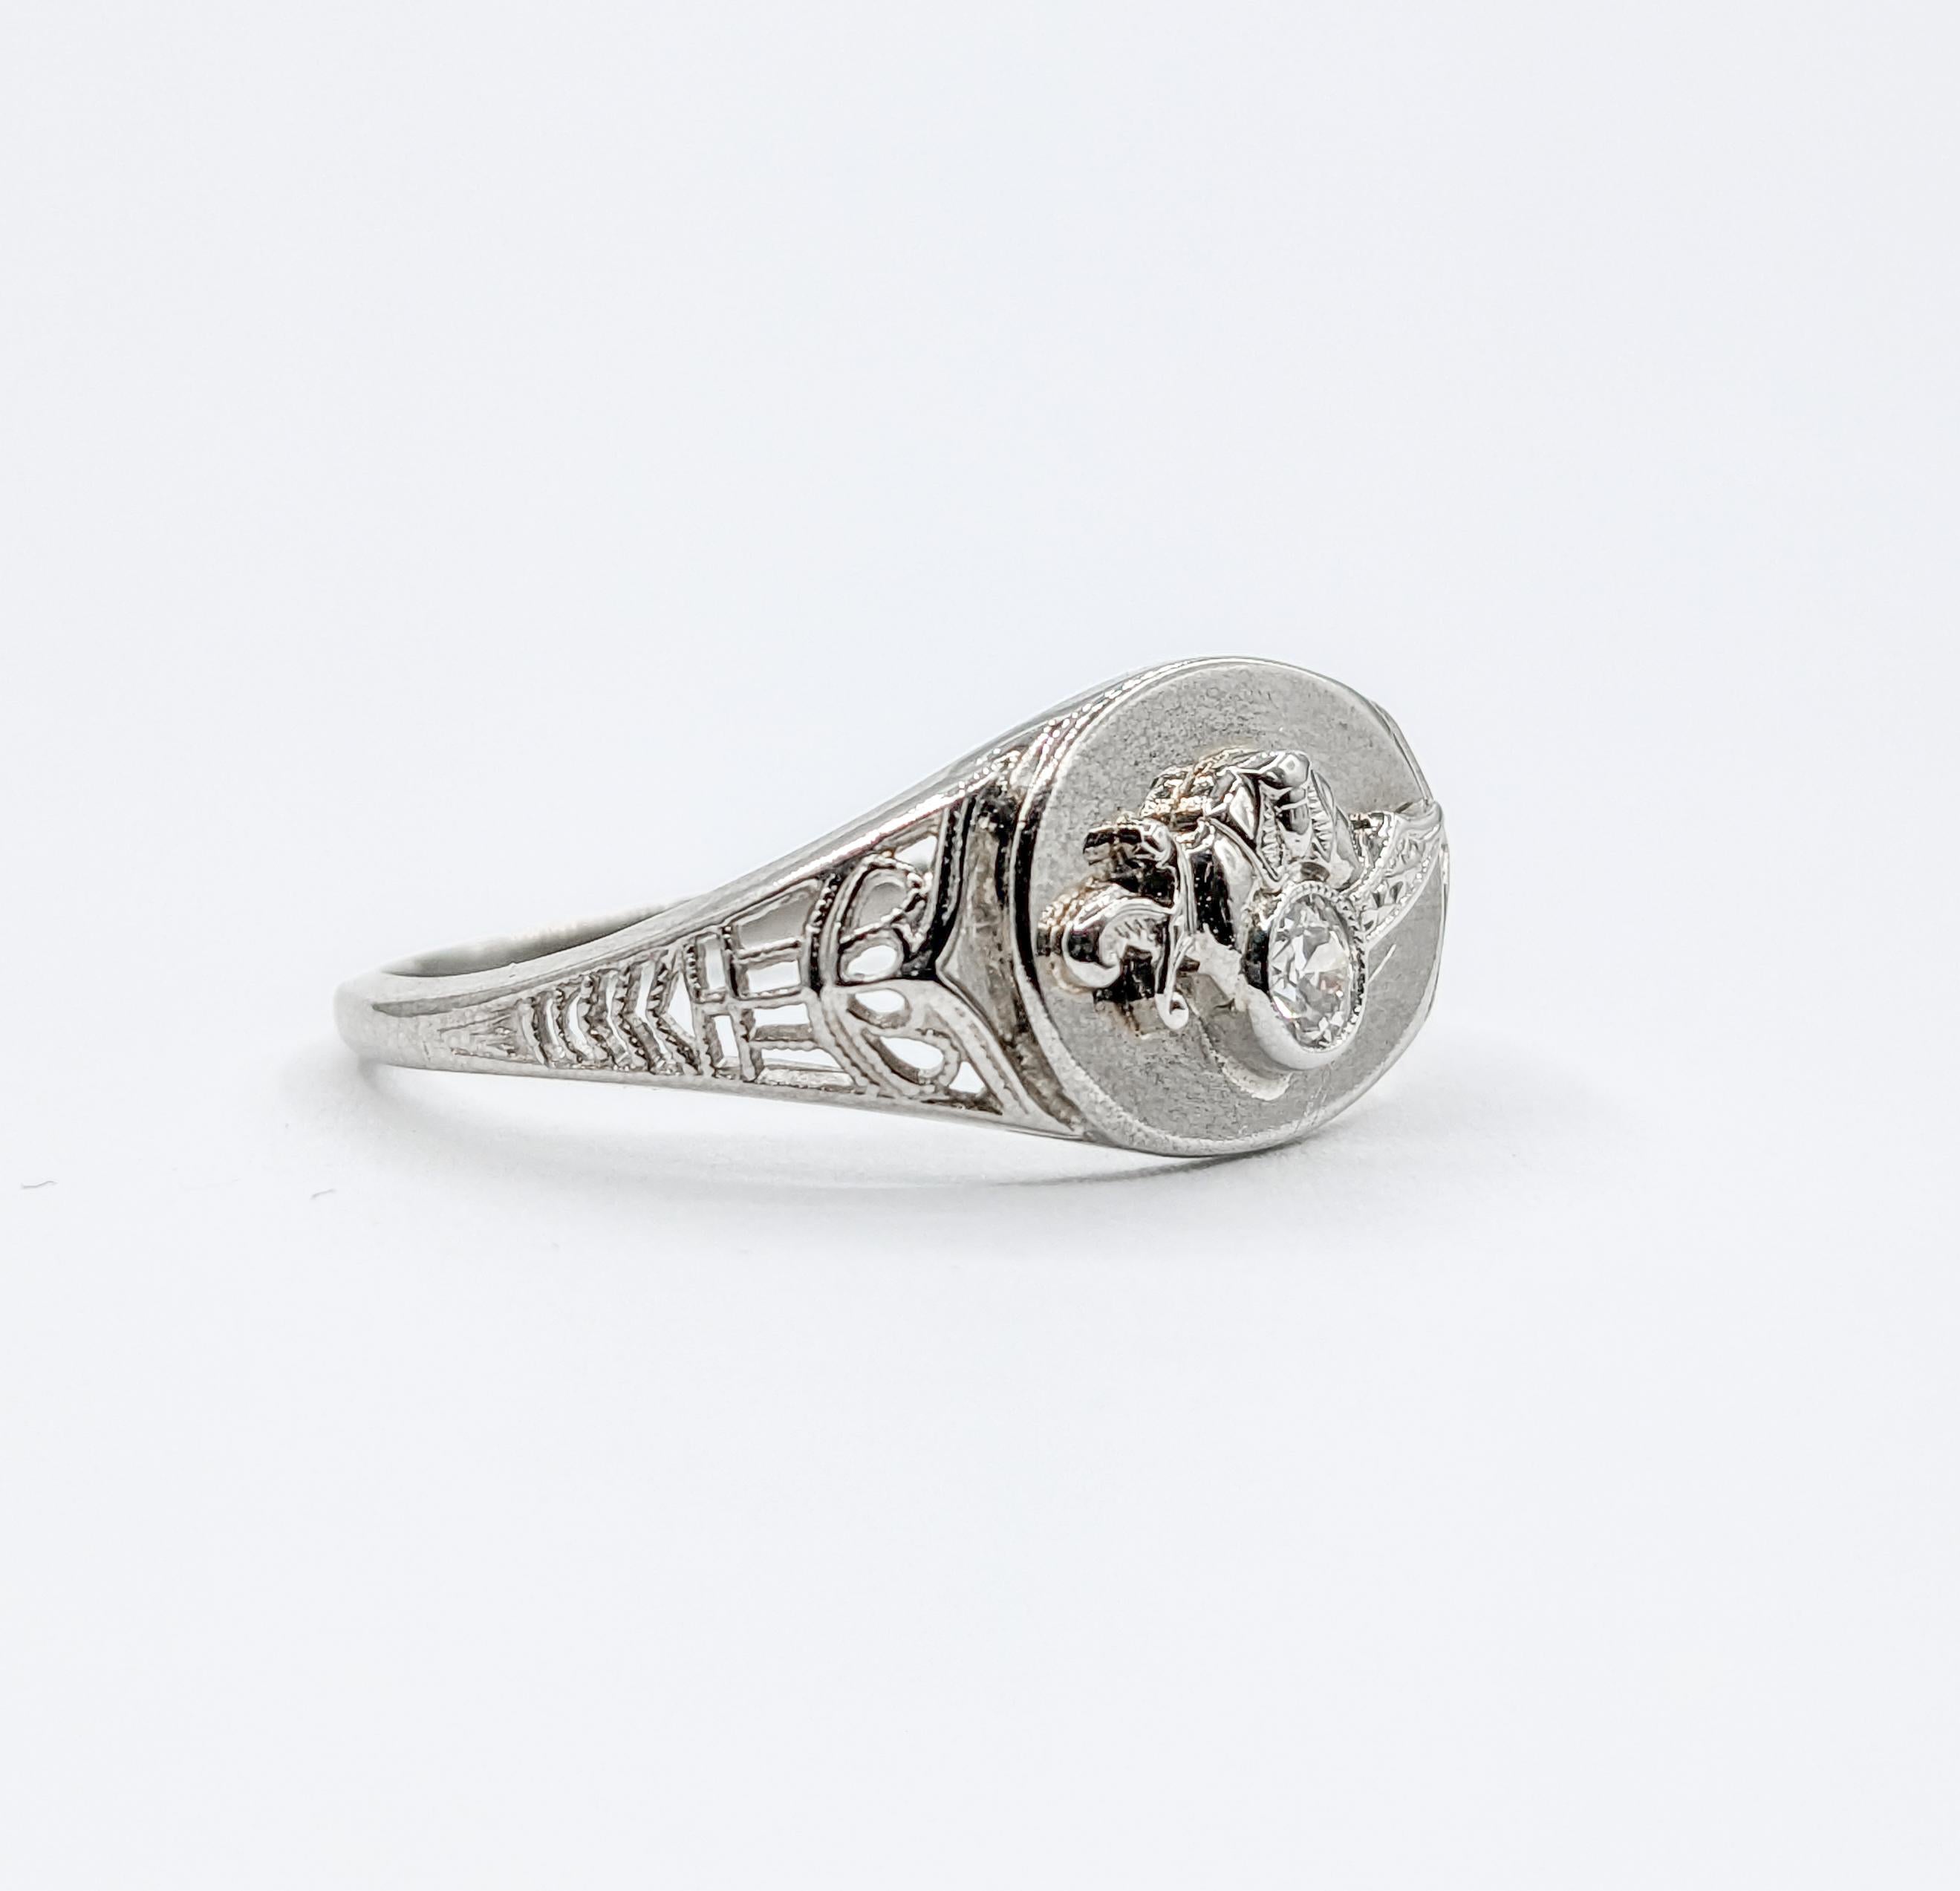 Shriner Diamond Filigree Ring in White Gold In Excellent Condition For Sale In Bloomington, MN